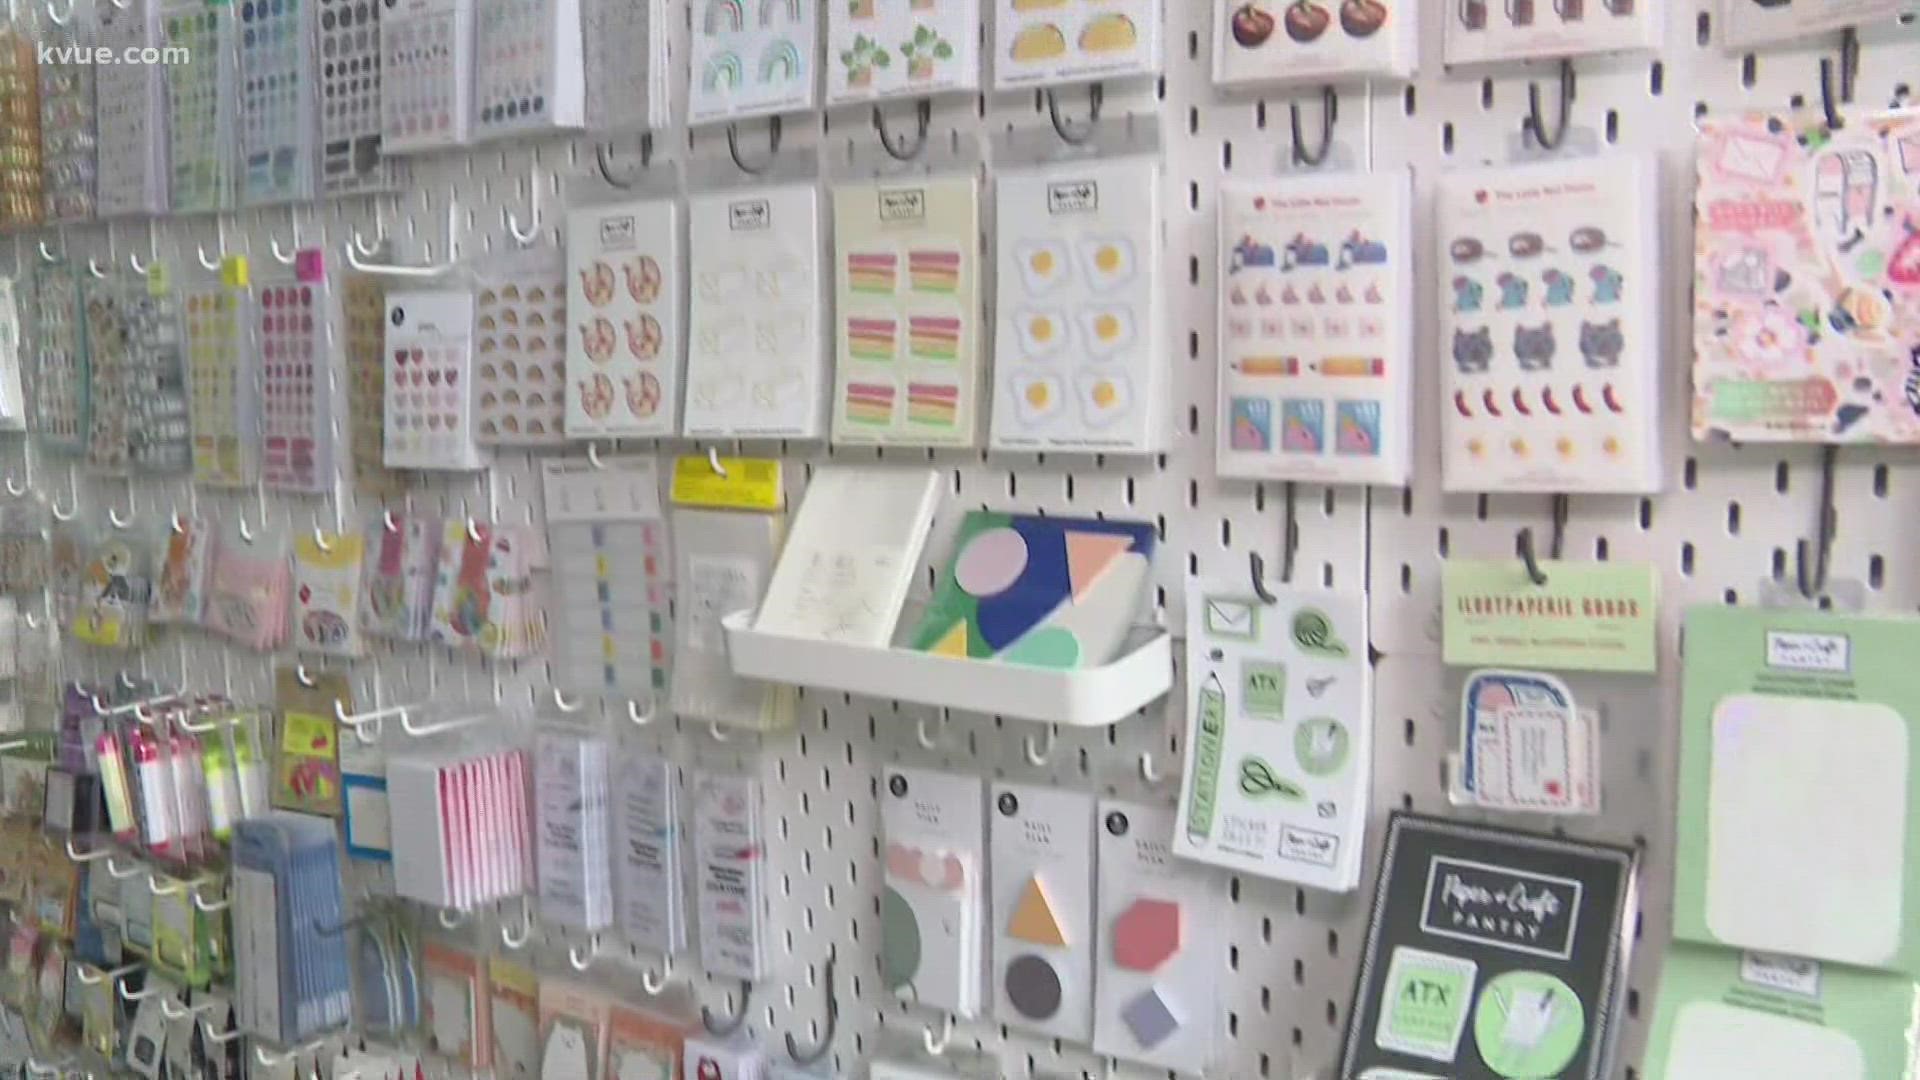 Find unique cards, stationery, journals and more while supporting local.